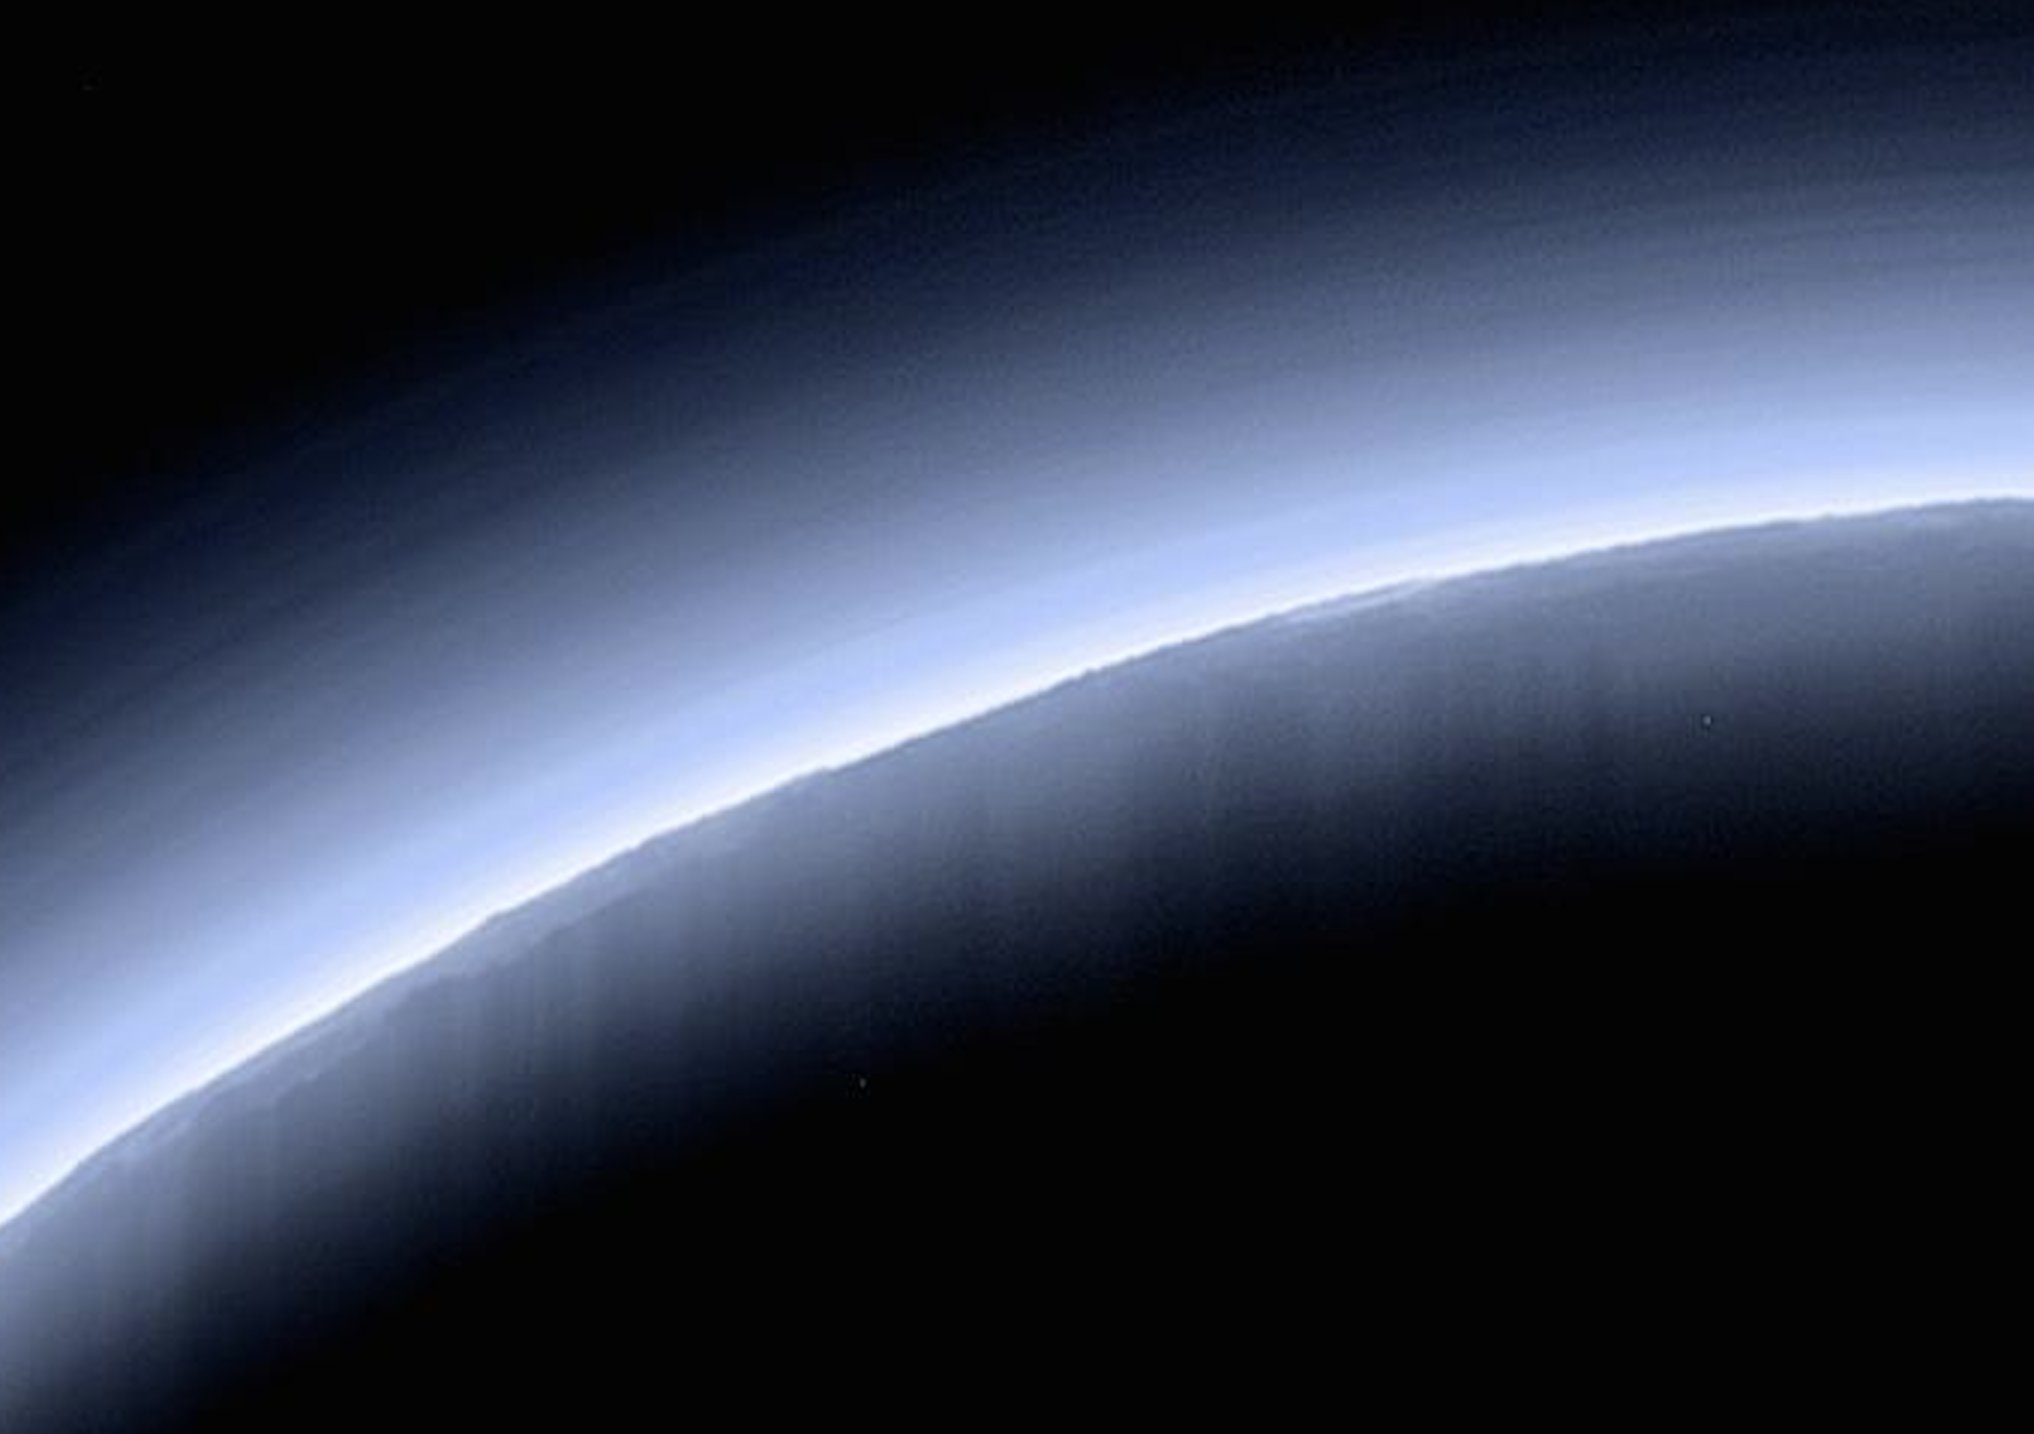 the curving horizon of Pluto, with blue layers of atmosphere visible, and mountains casting long shadows in the haze